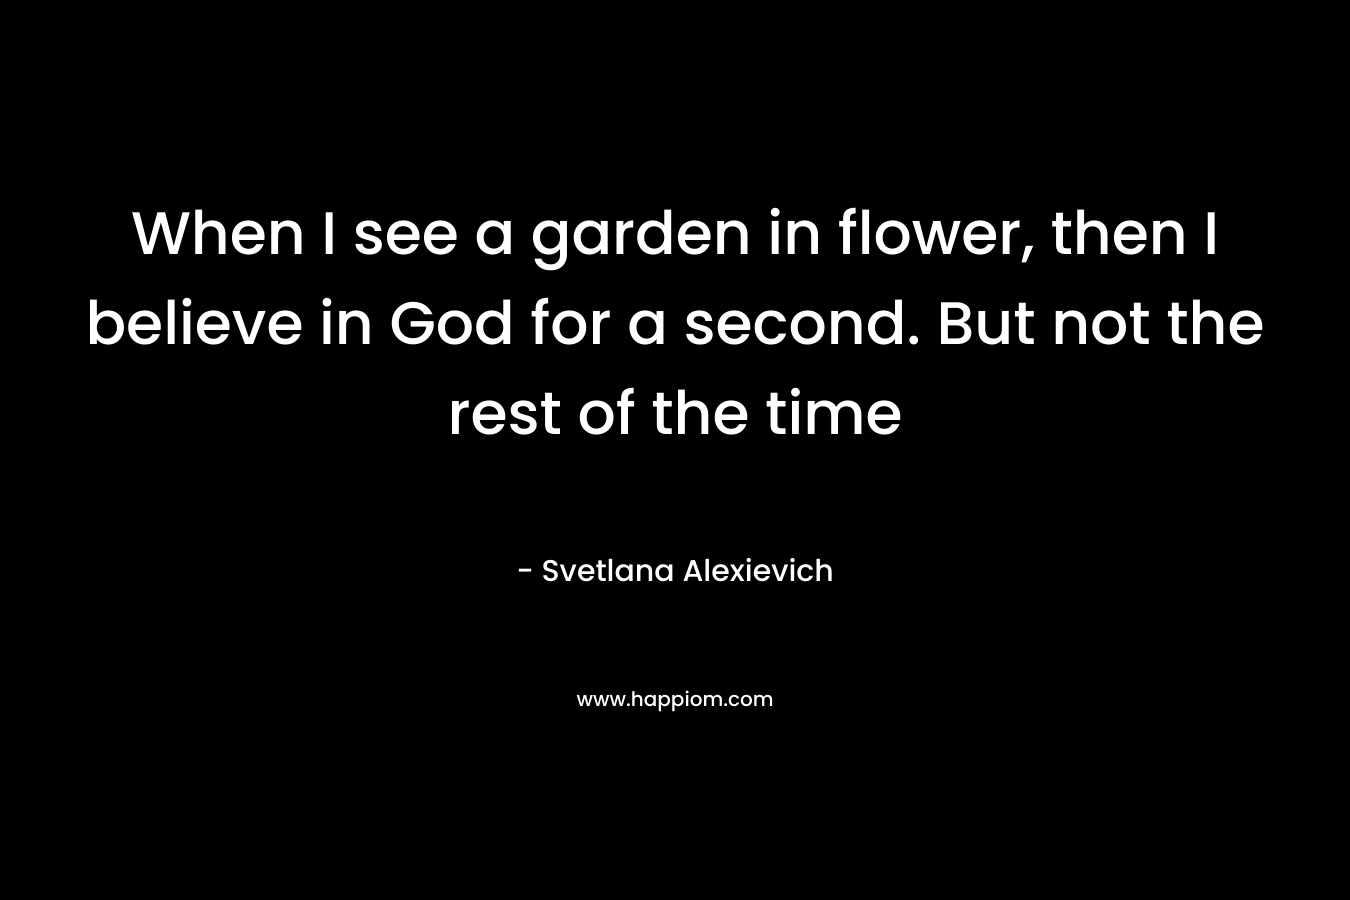 When I see a garden in flower, then I believe in God for a second. But not the rest of the time – Svetlana Alexievich